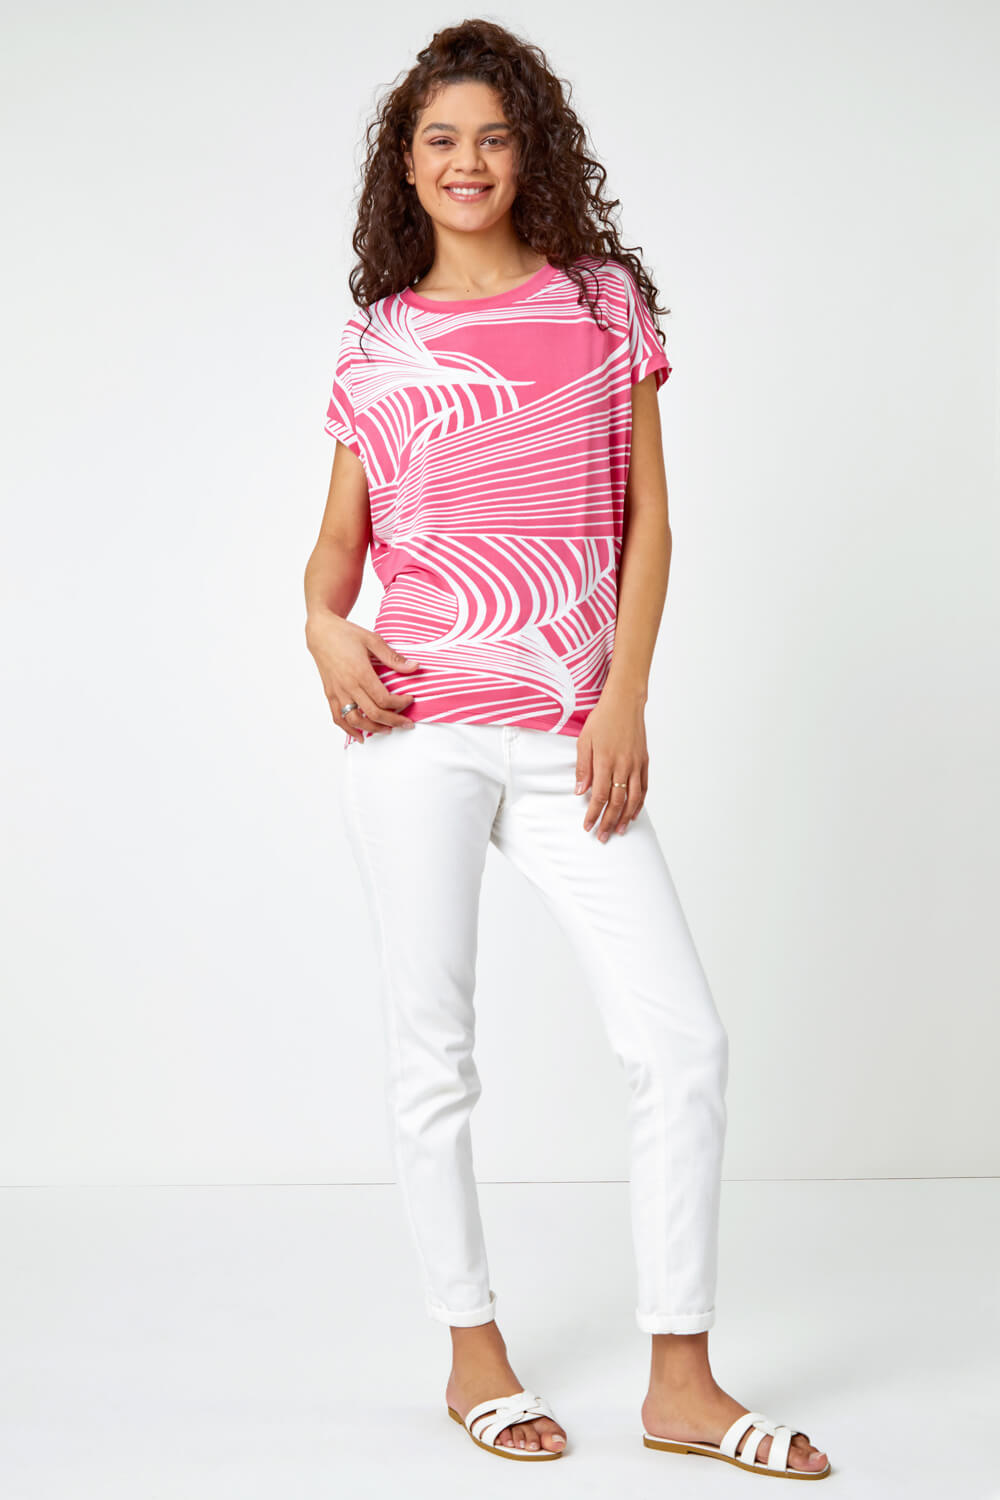 PINK Linear Textured Print Blouson Top, Image 2 of 5